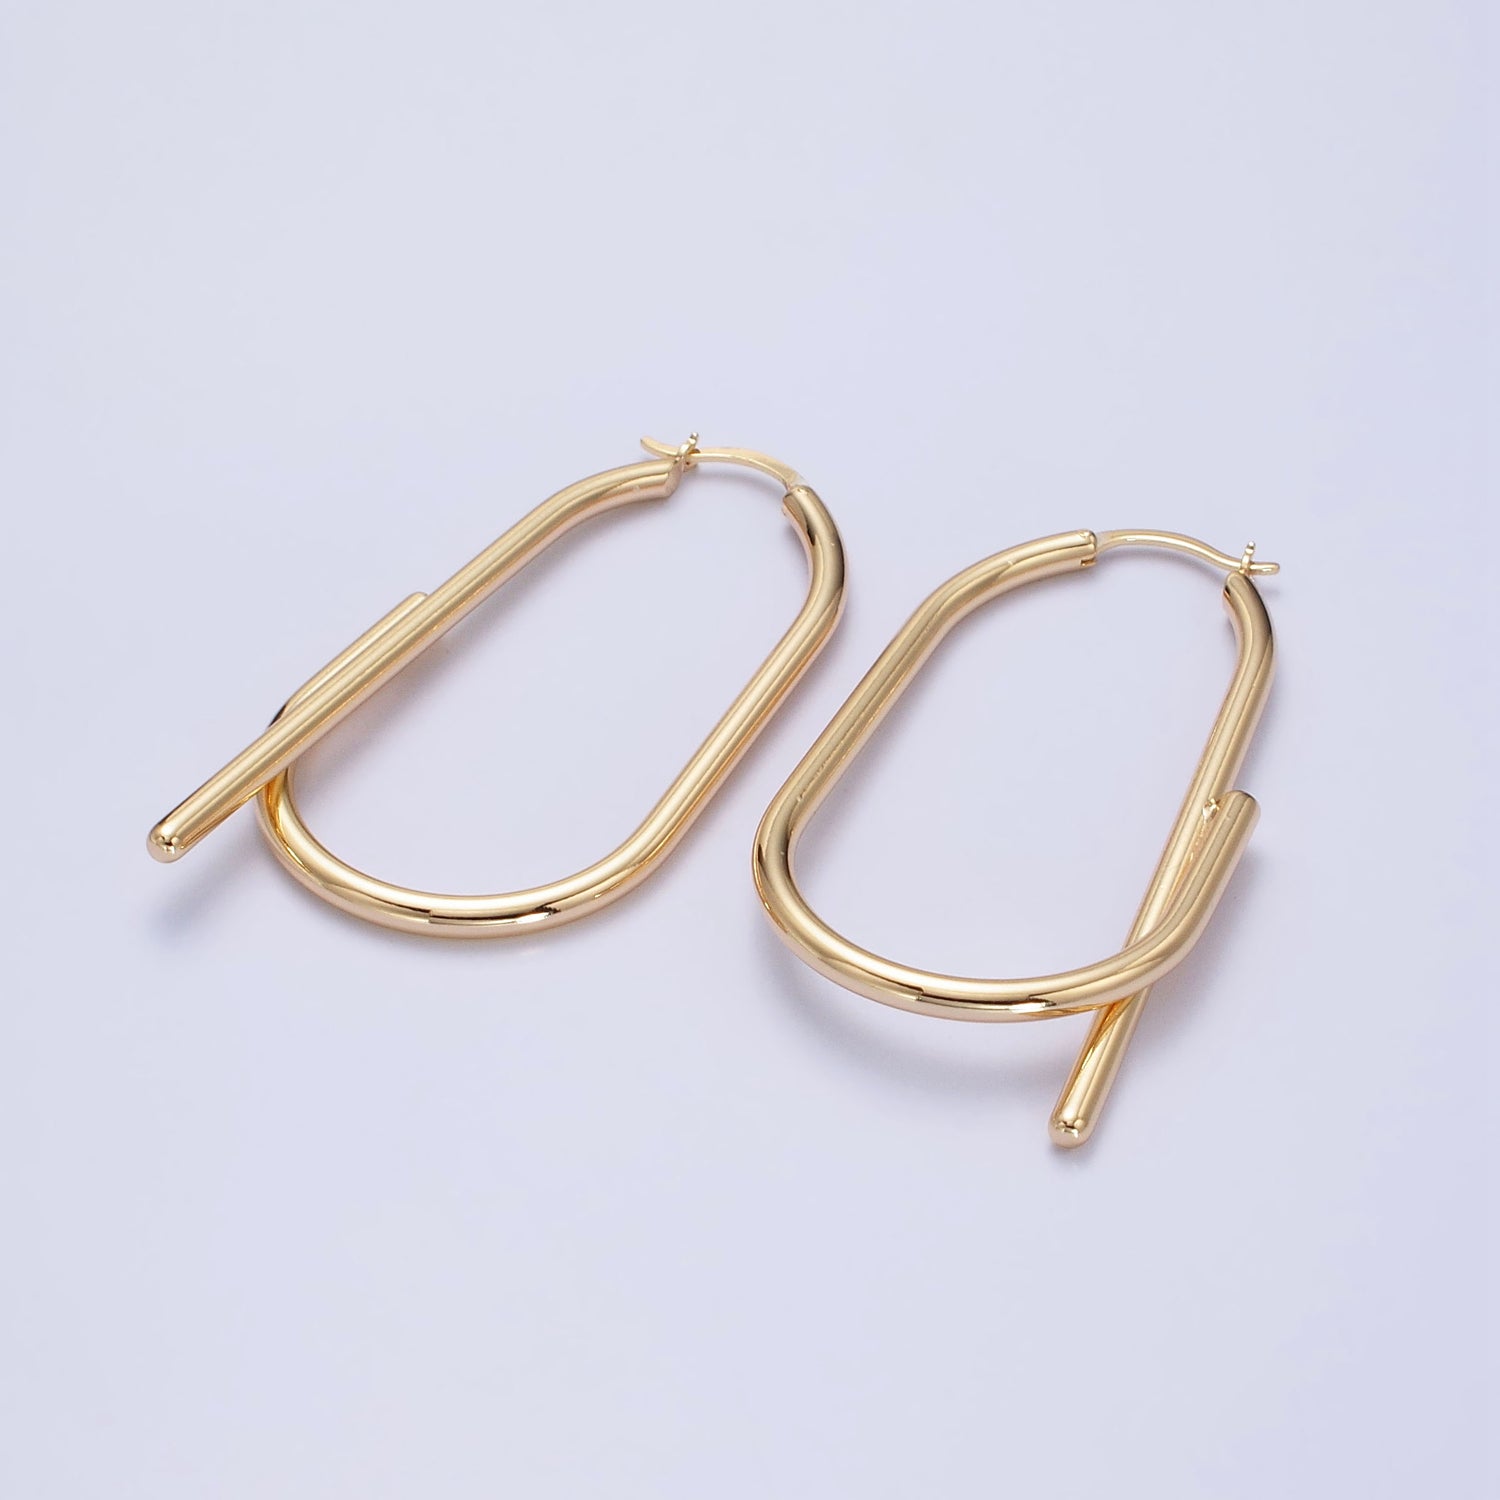 Gold Twisted Oval Hinged Hoop Earring with Hinged Closure Silver Big Oval Hoop Statement Jewelry AB733 AB942